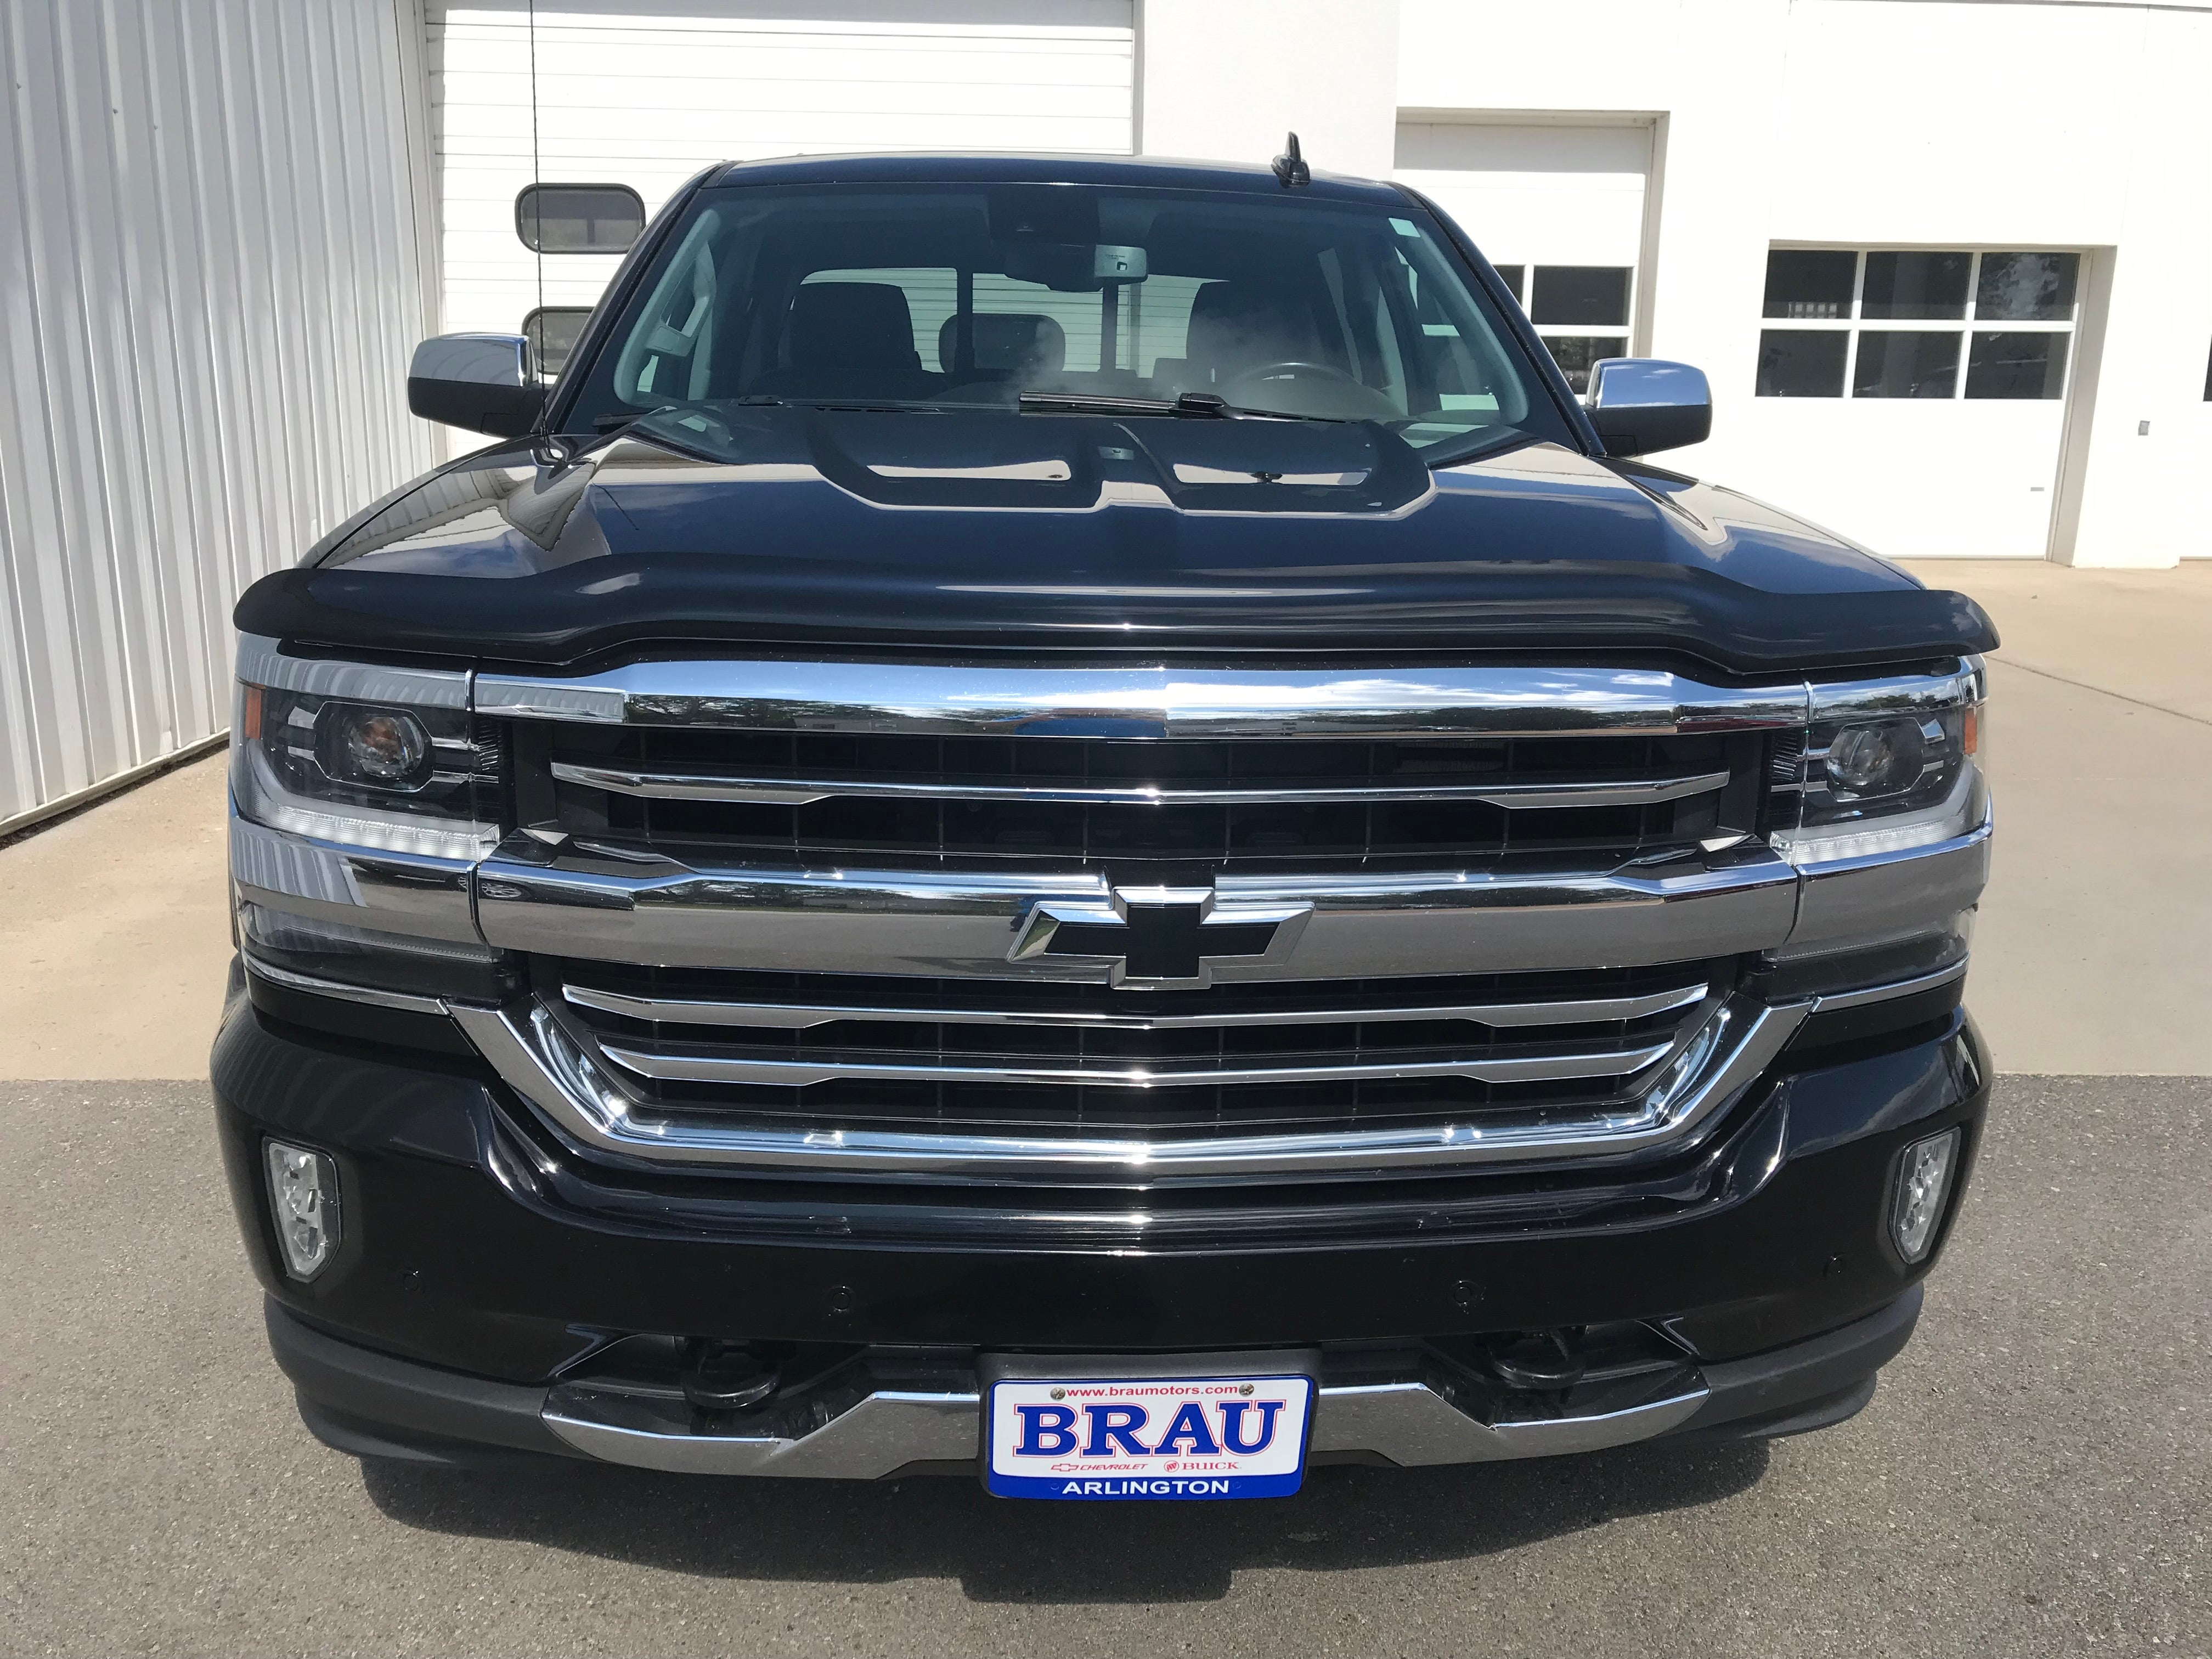 Used 2018 Chevrolet Silverado 1500 High Country with VIN 3GCUKTEC2JG310230 for sale in Arlington, Minnesota